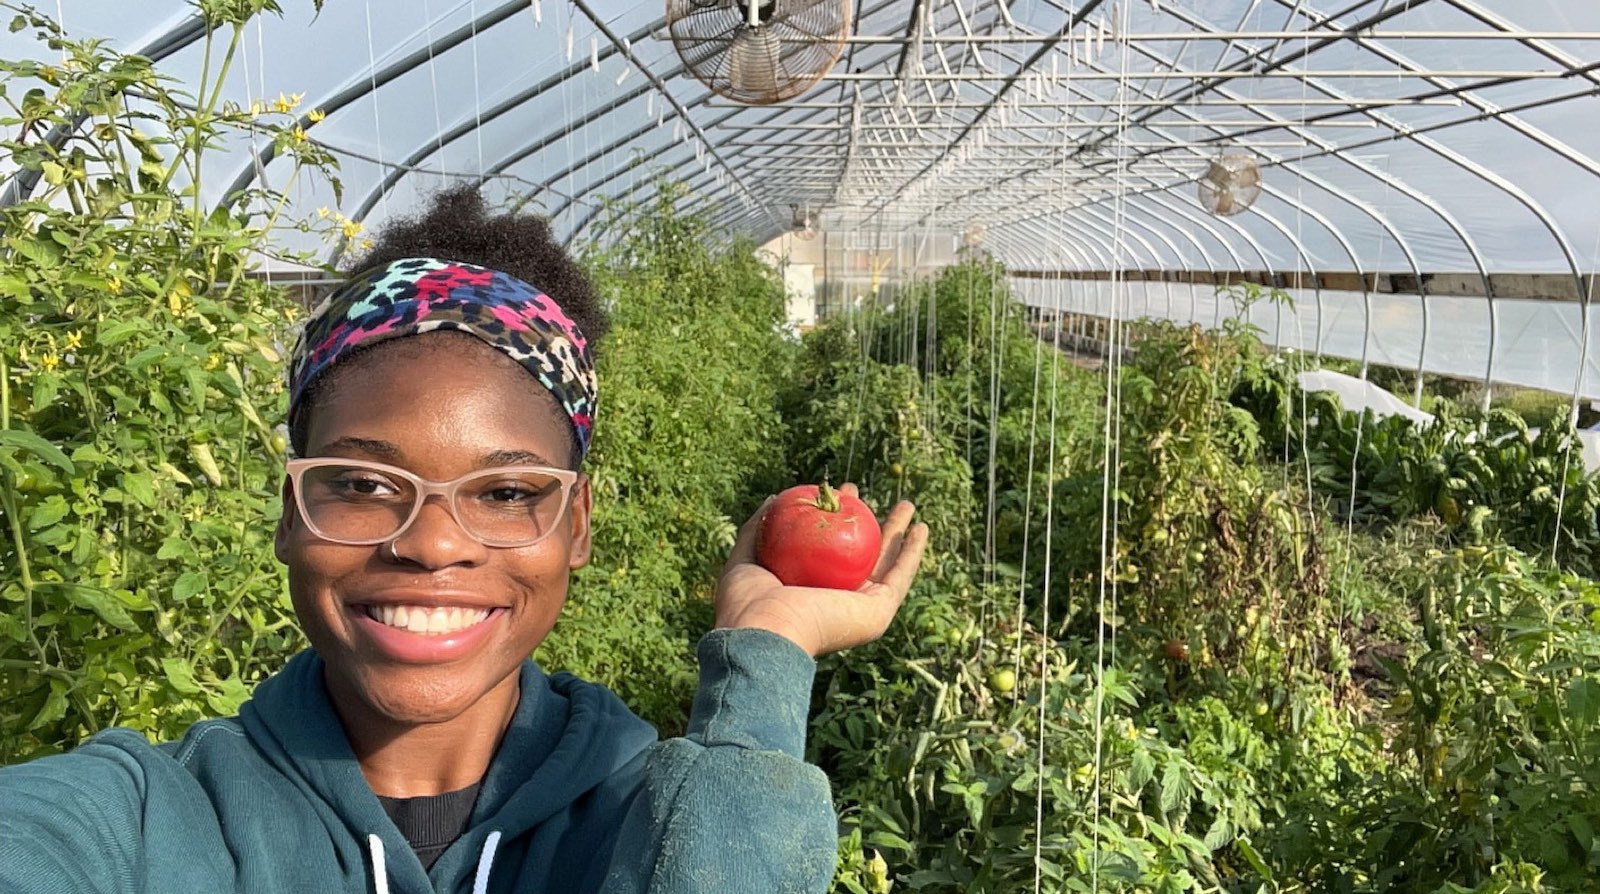 Holding a fresh picked tomato in her hand, student Briana Hurt poses for a photo in a high tunnel in the height of summer.